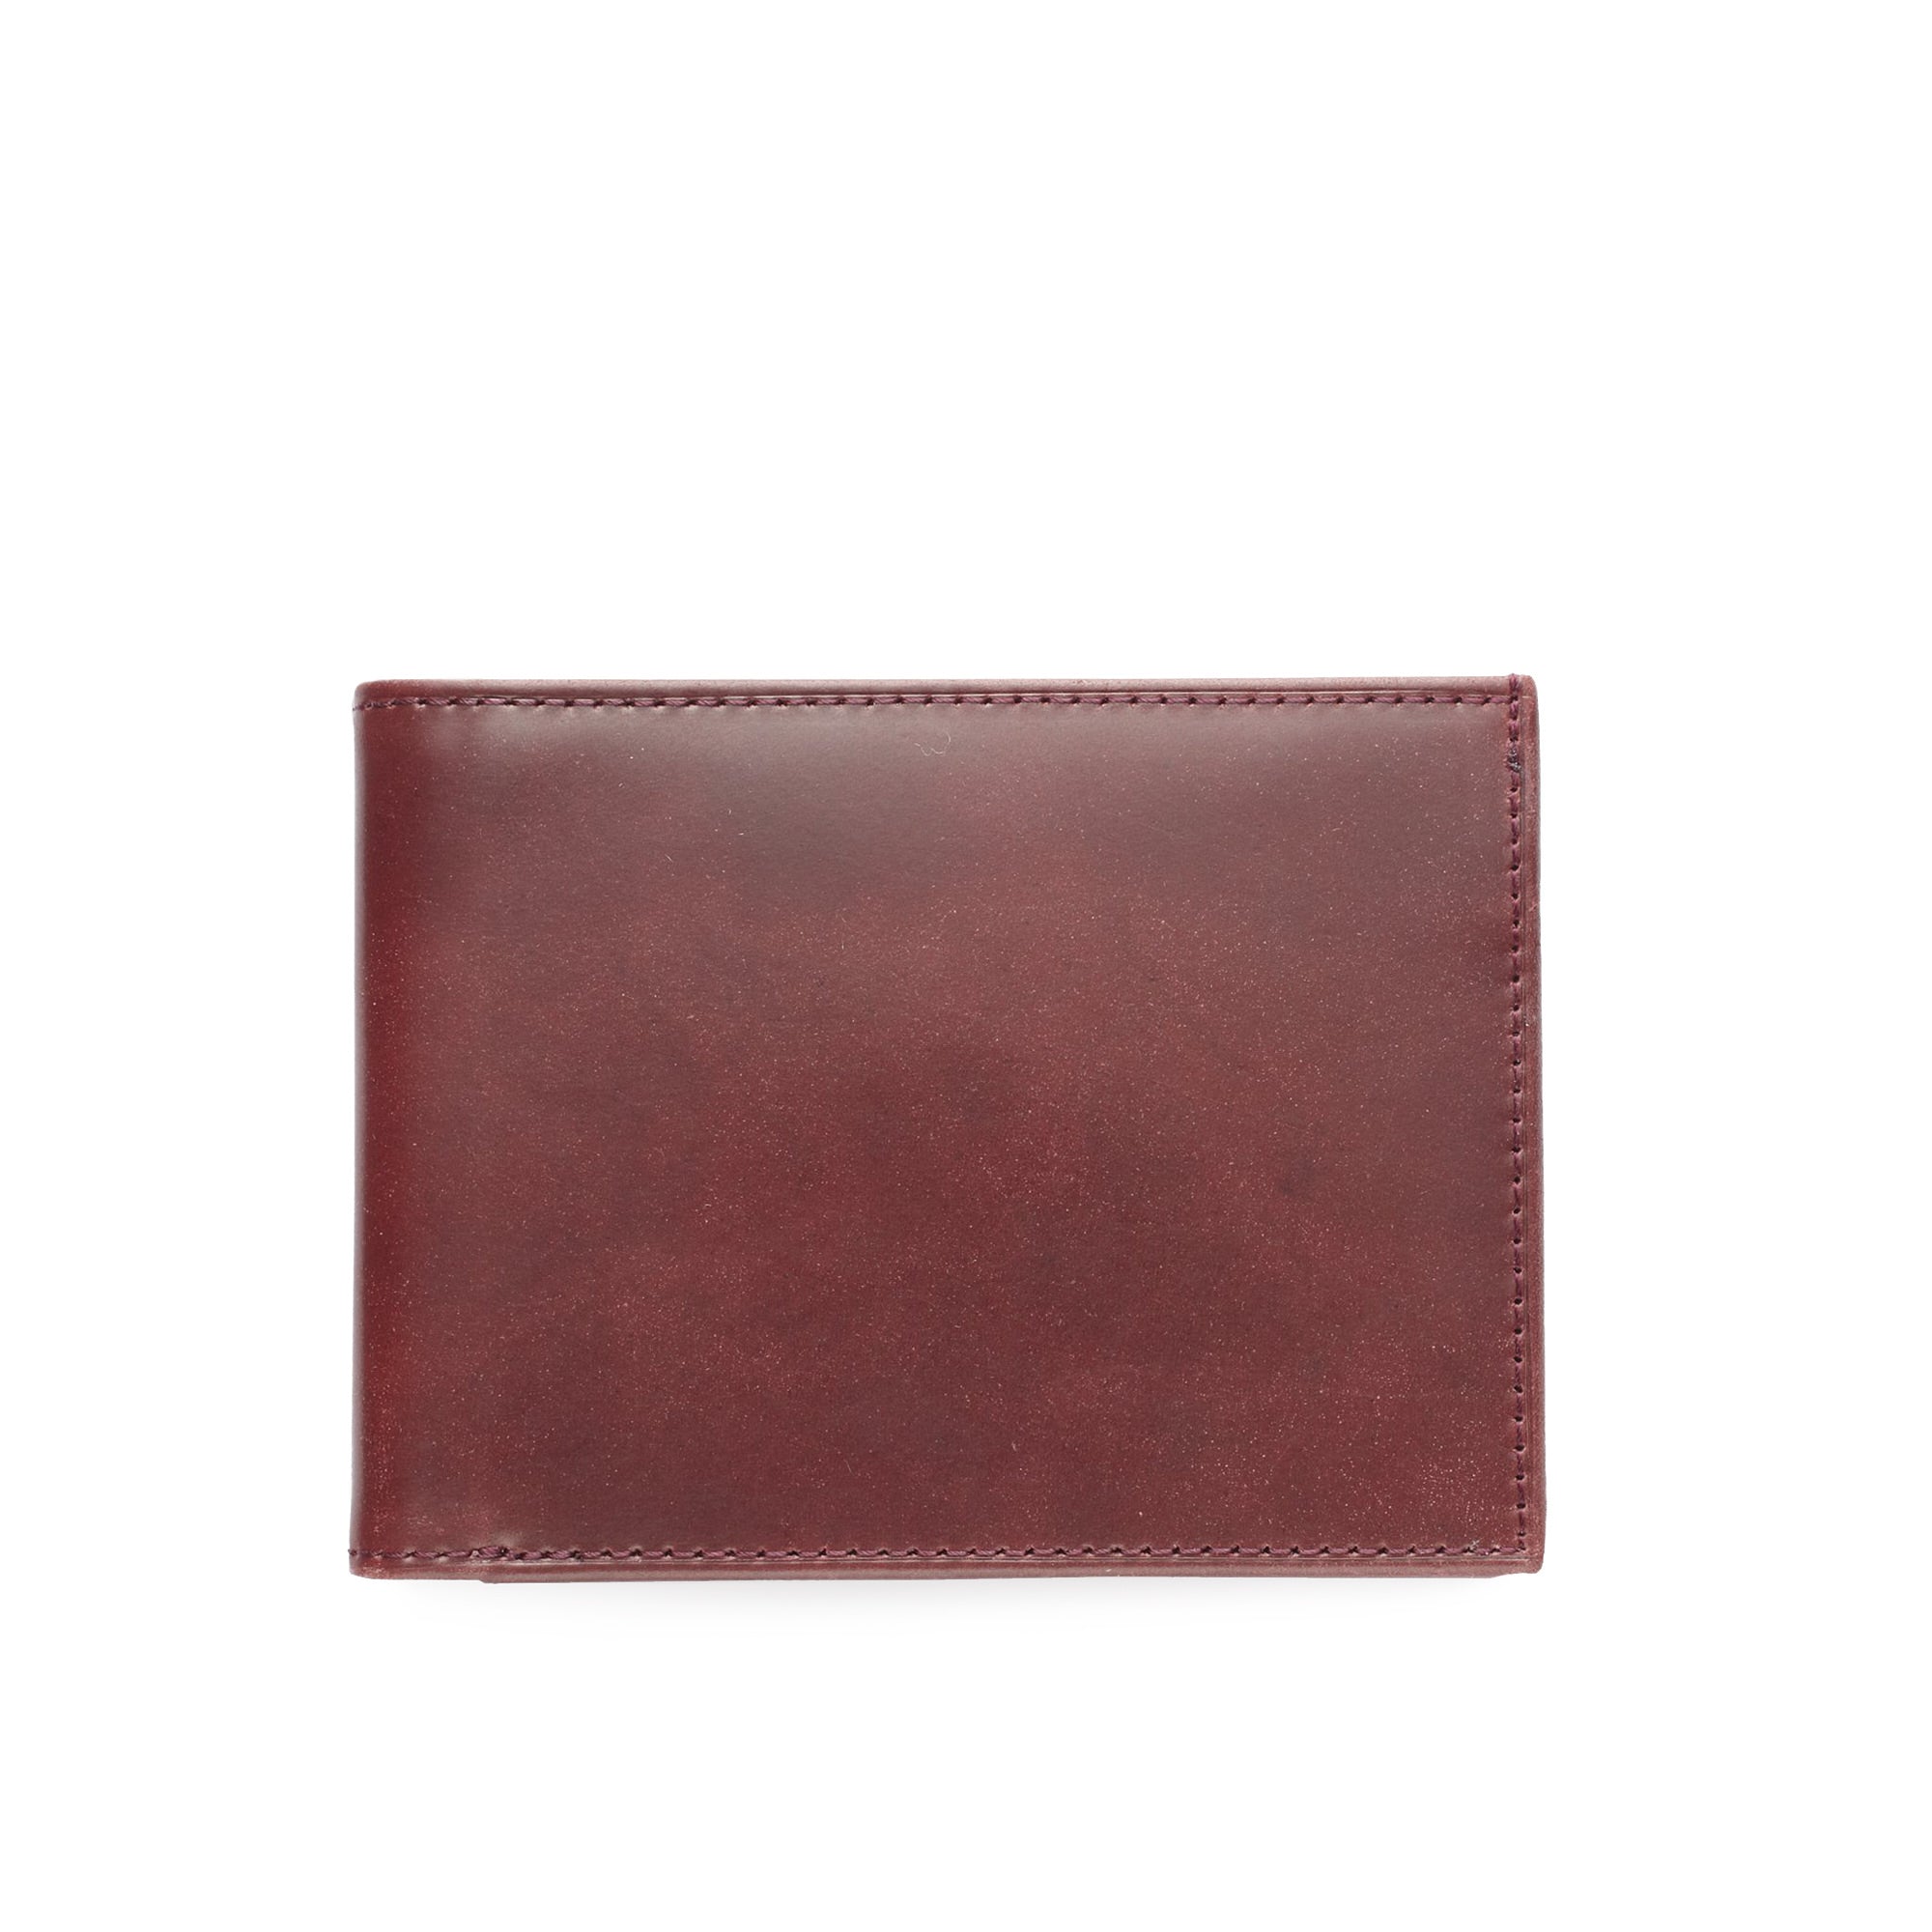 COMPACT HIP WALLET OXBLOOD